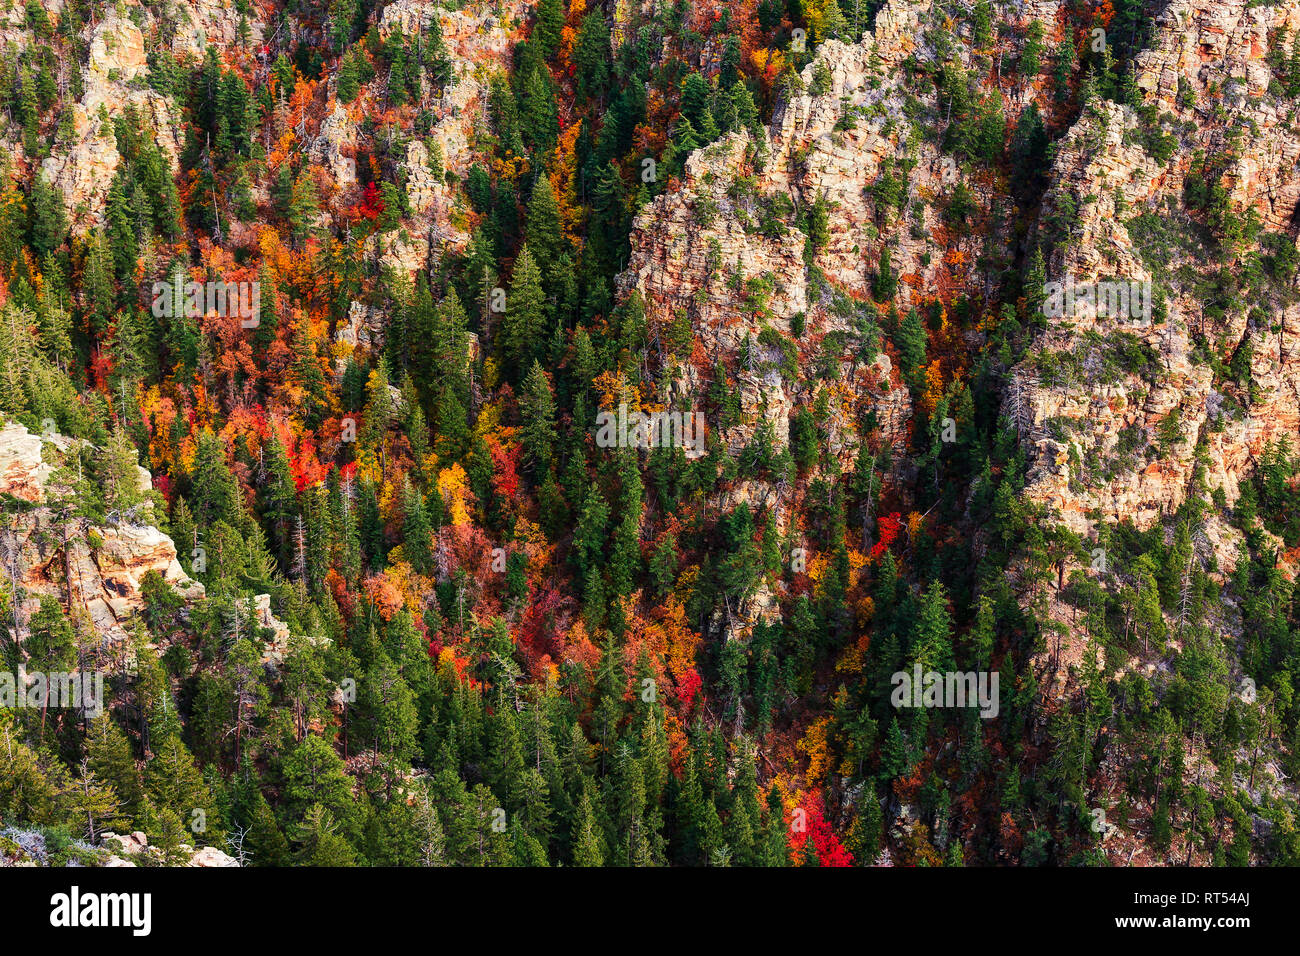 Bigtooth Maple trees with peak fall colors in a canyon along the Mogollon Rim near Payson, Arizona, USA Stock Photo